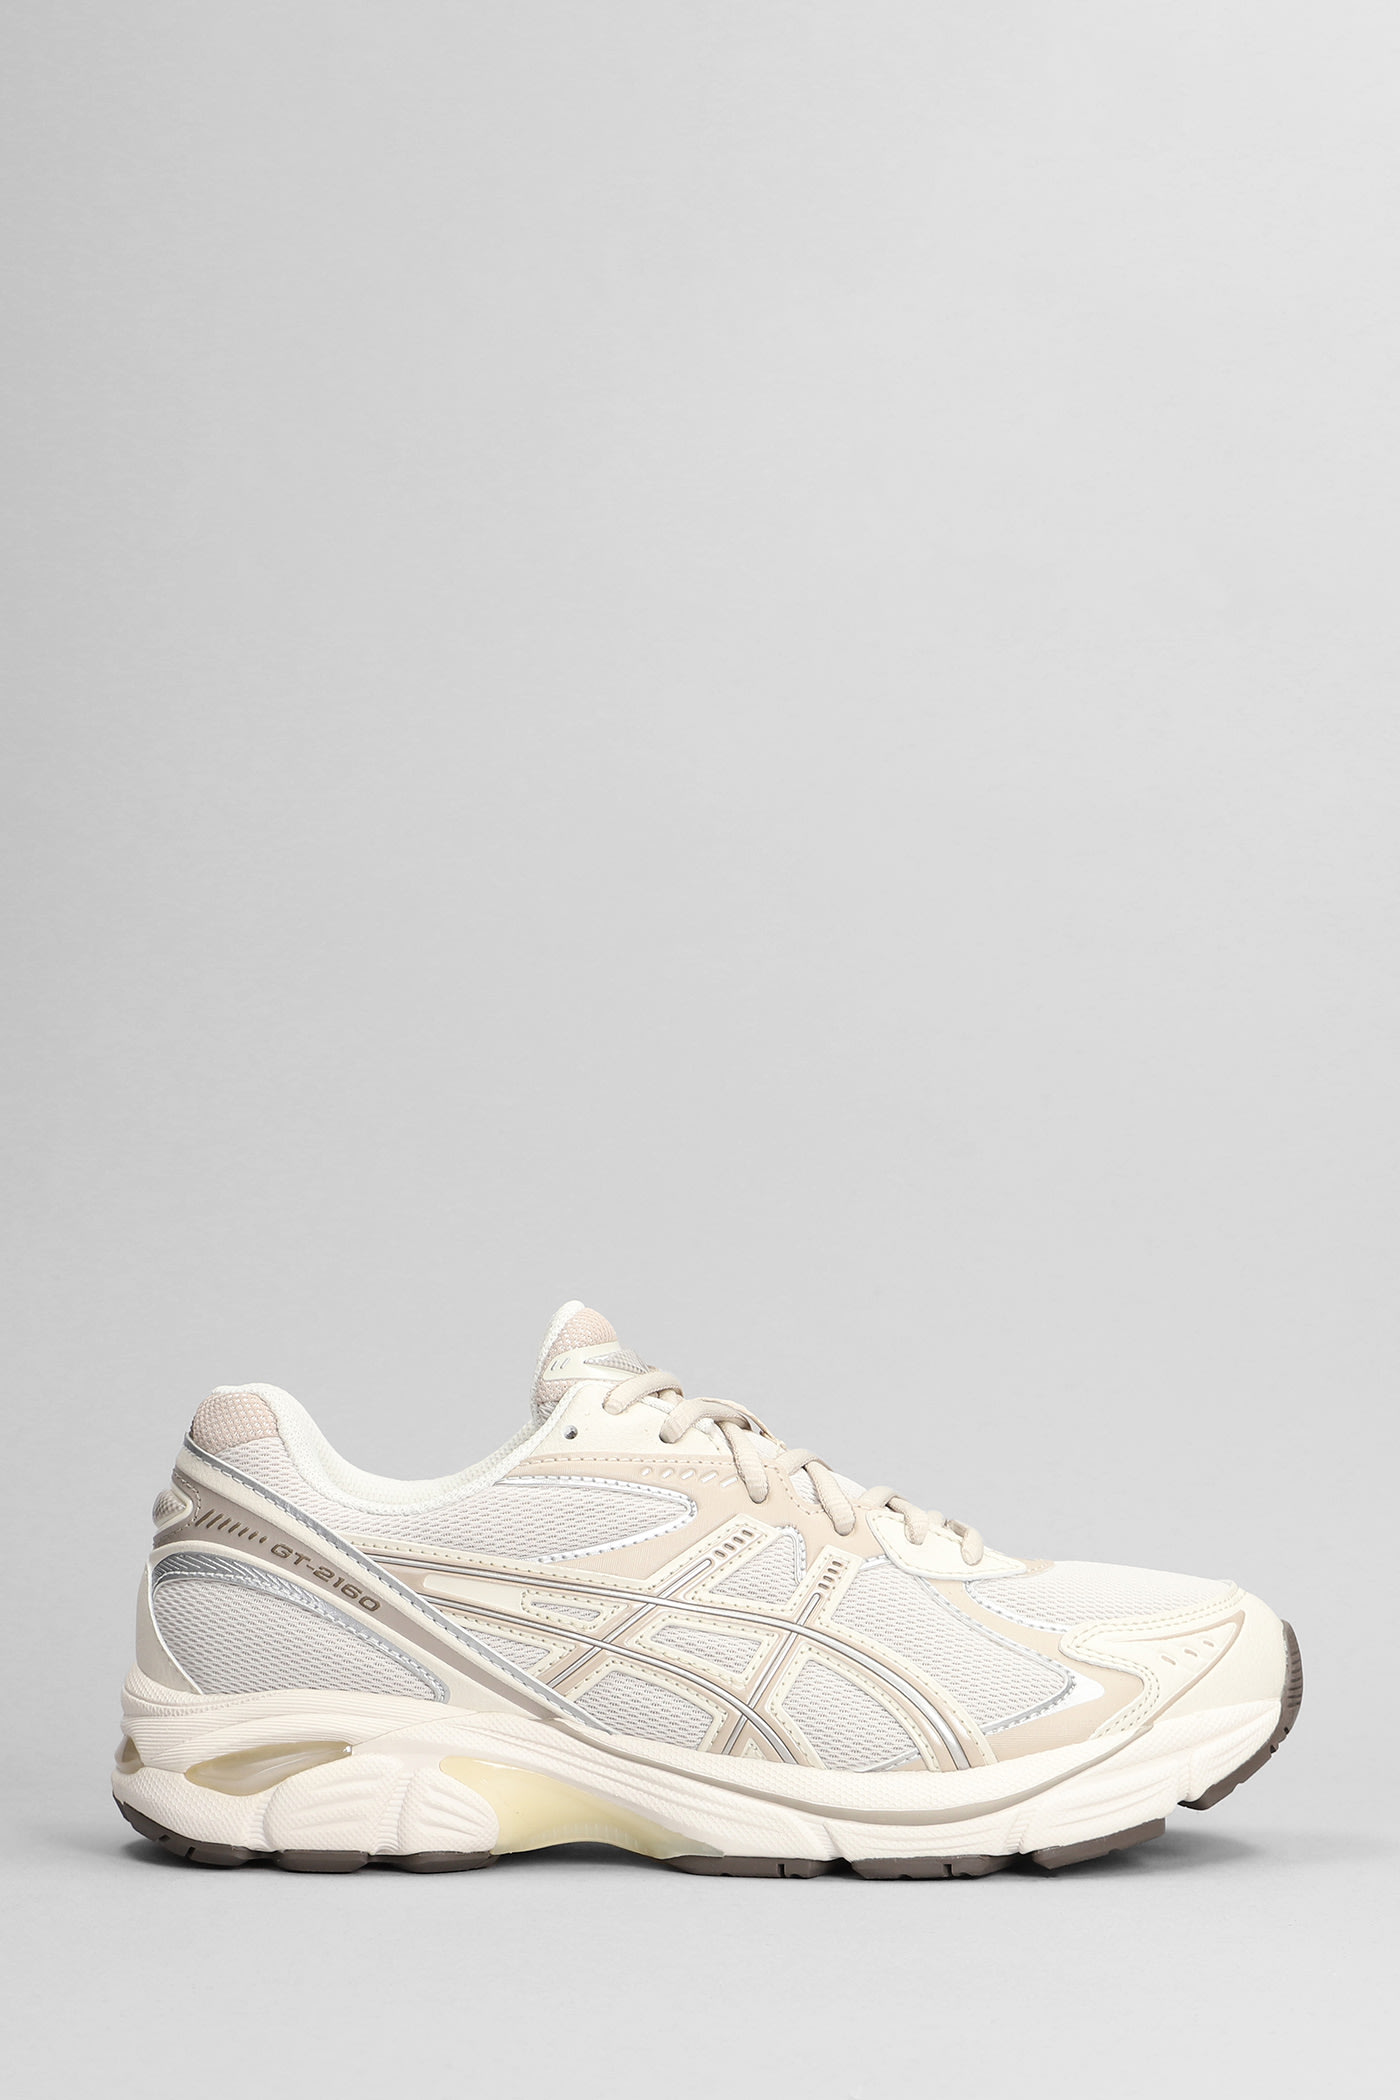 ASICS GT-2160 SNEAKERS IN TAUPE SYNTHETIC FIBERS